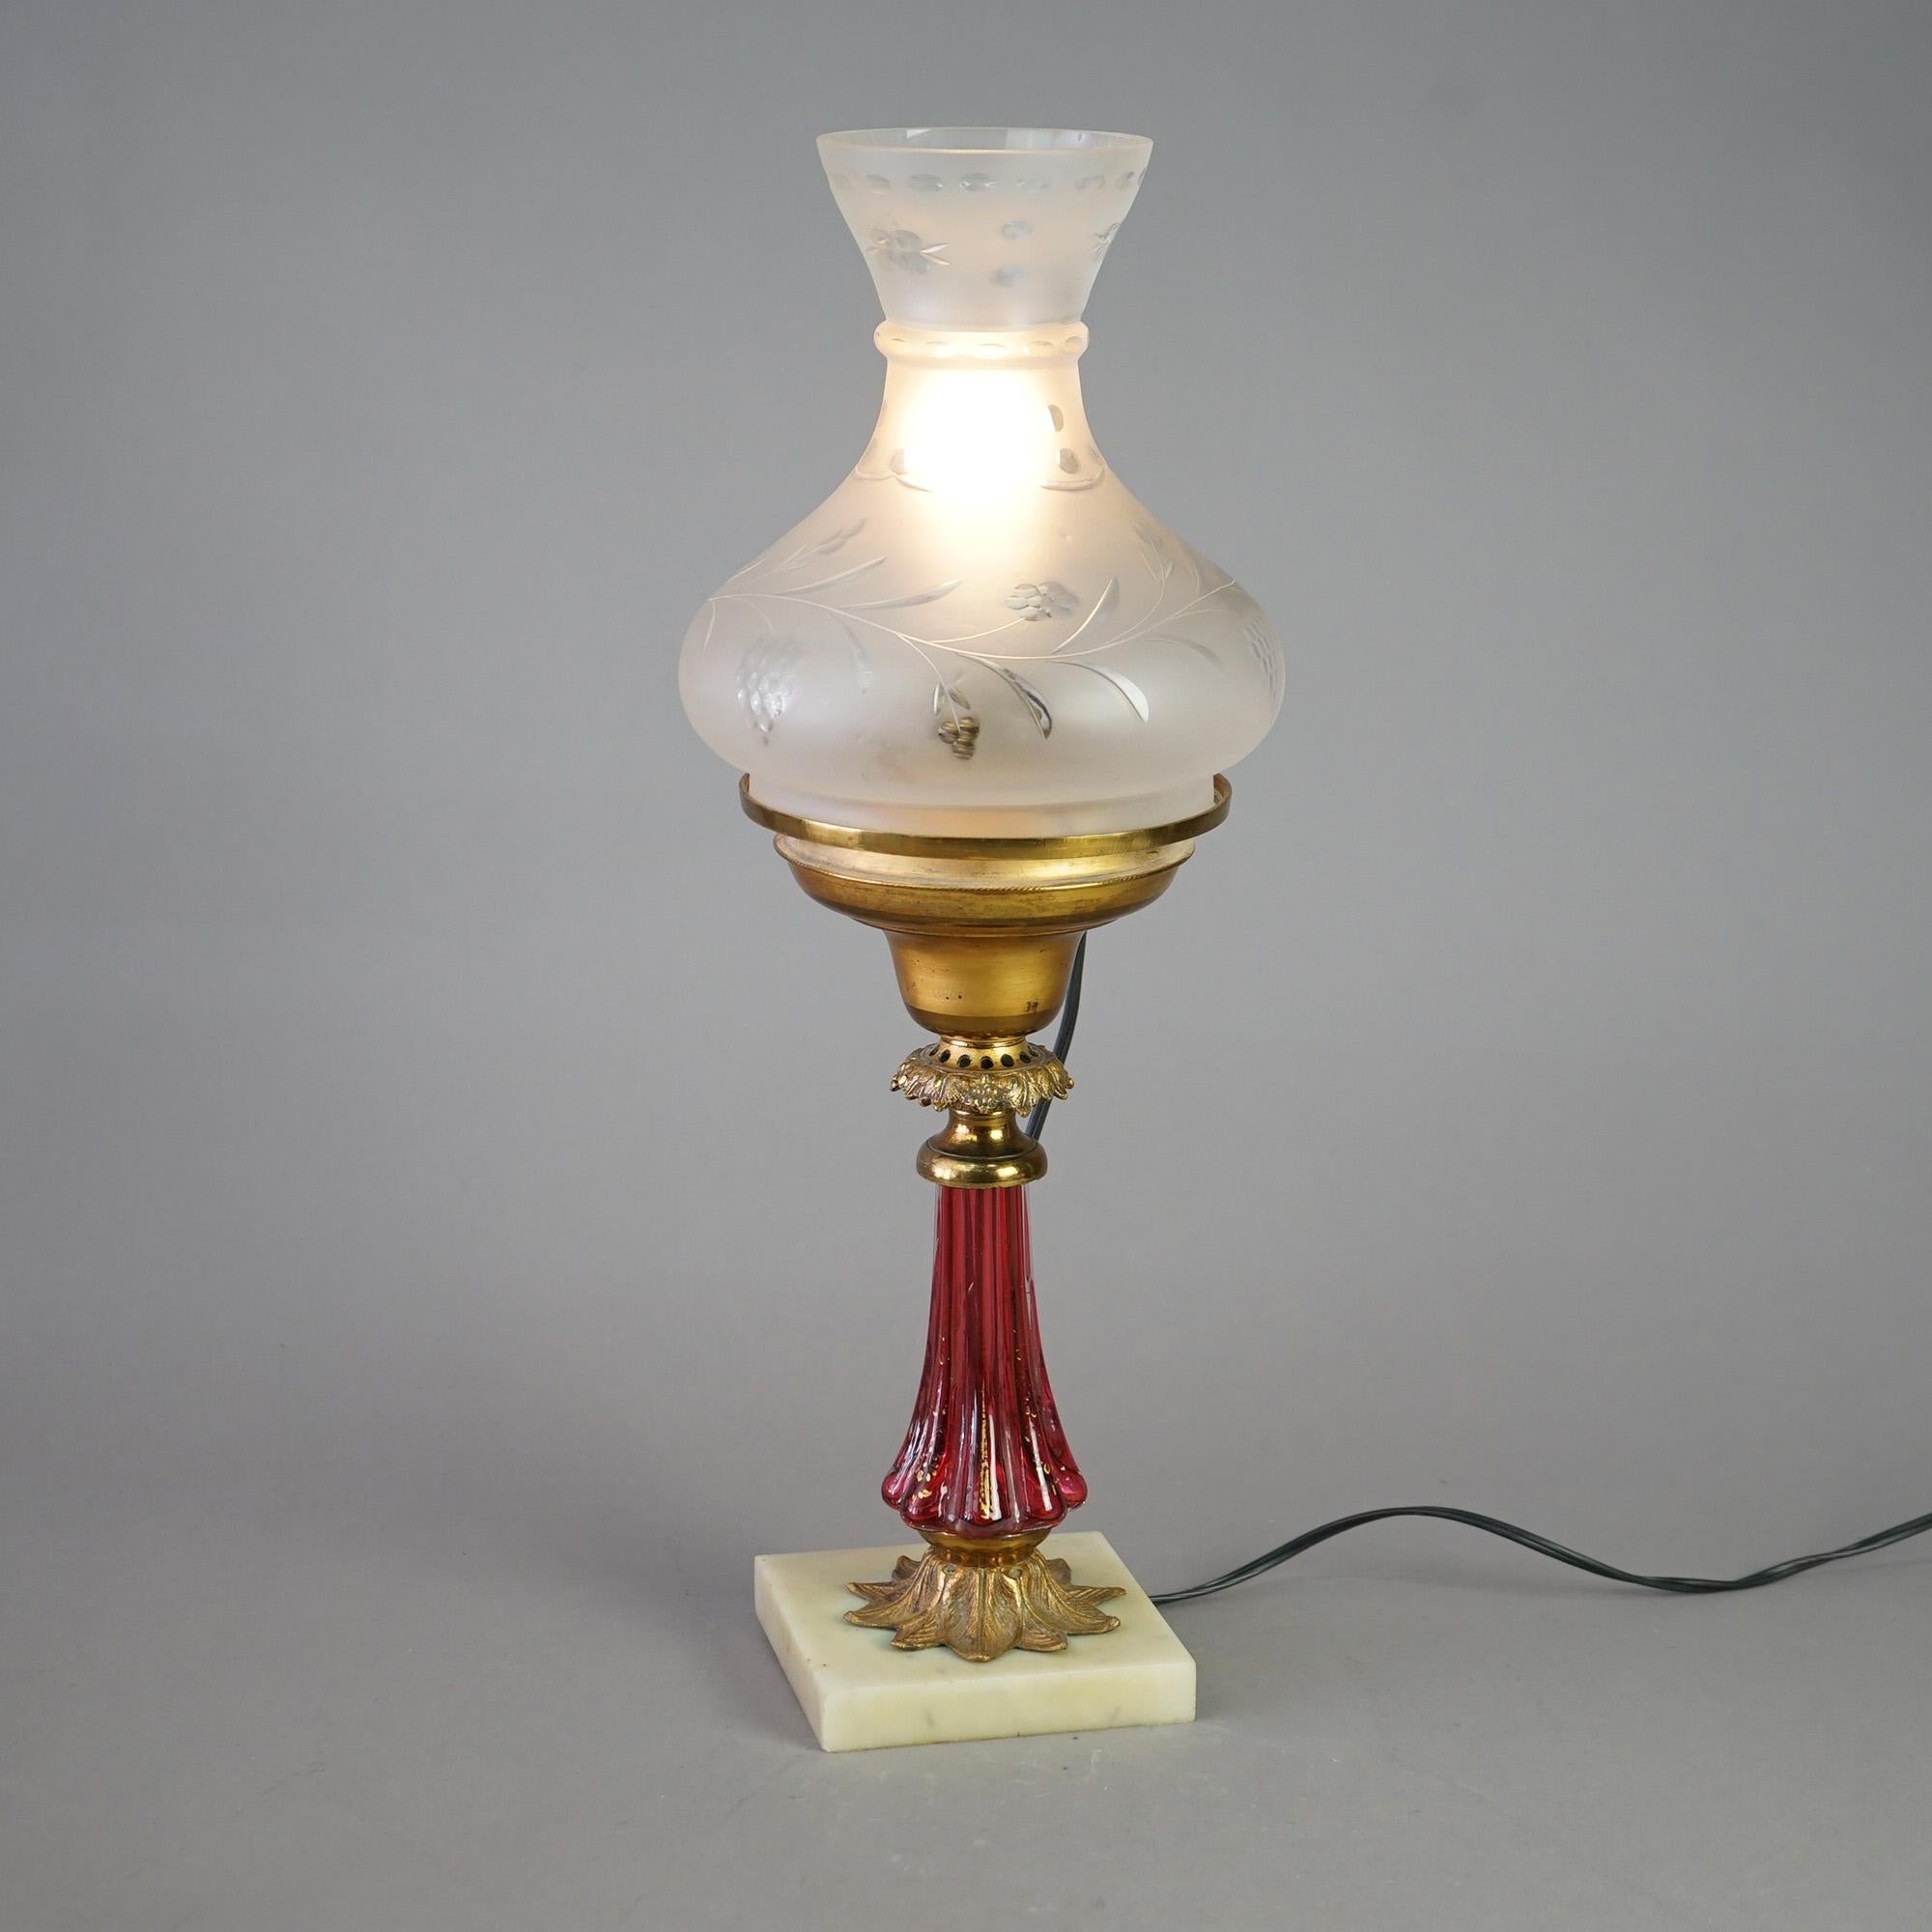 An antique solar lamp in the manner of Cornelius offers cutback glass shade over cranberry glass base on marble foot, electrified, c1850

Measures- 20.75''H x 7.5''W x 7.5''D